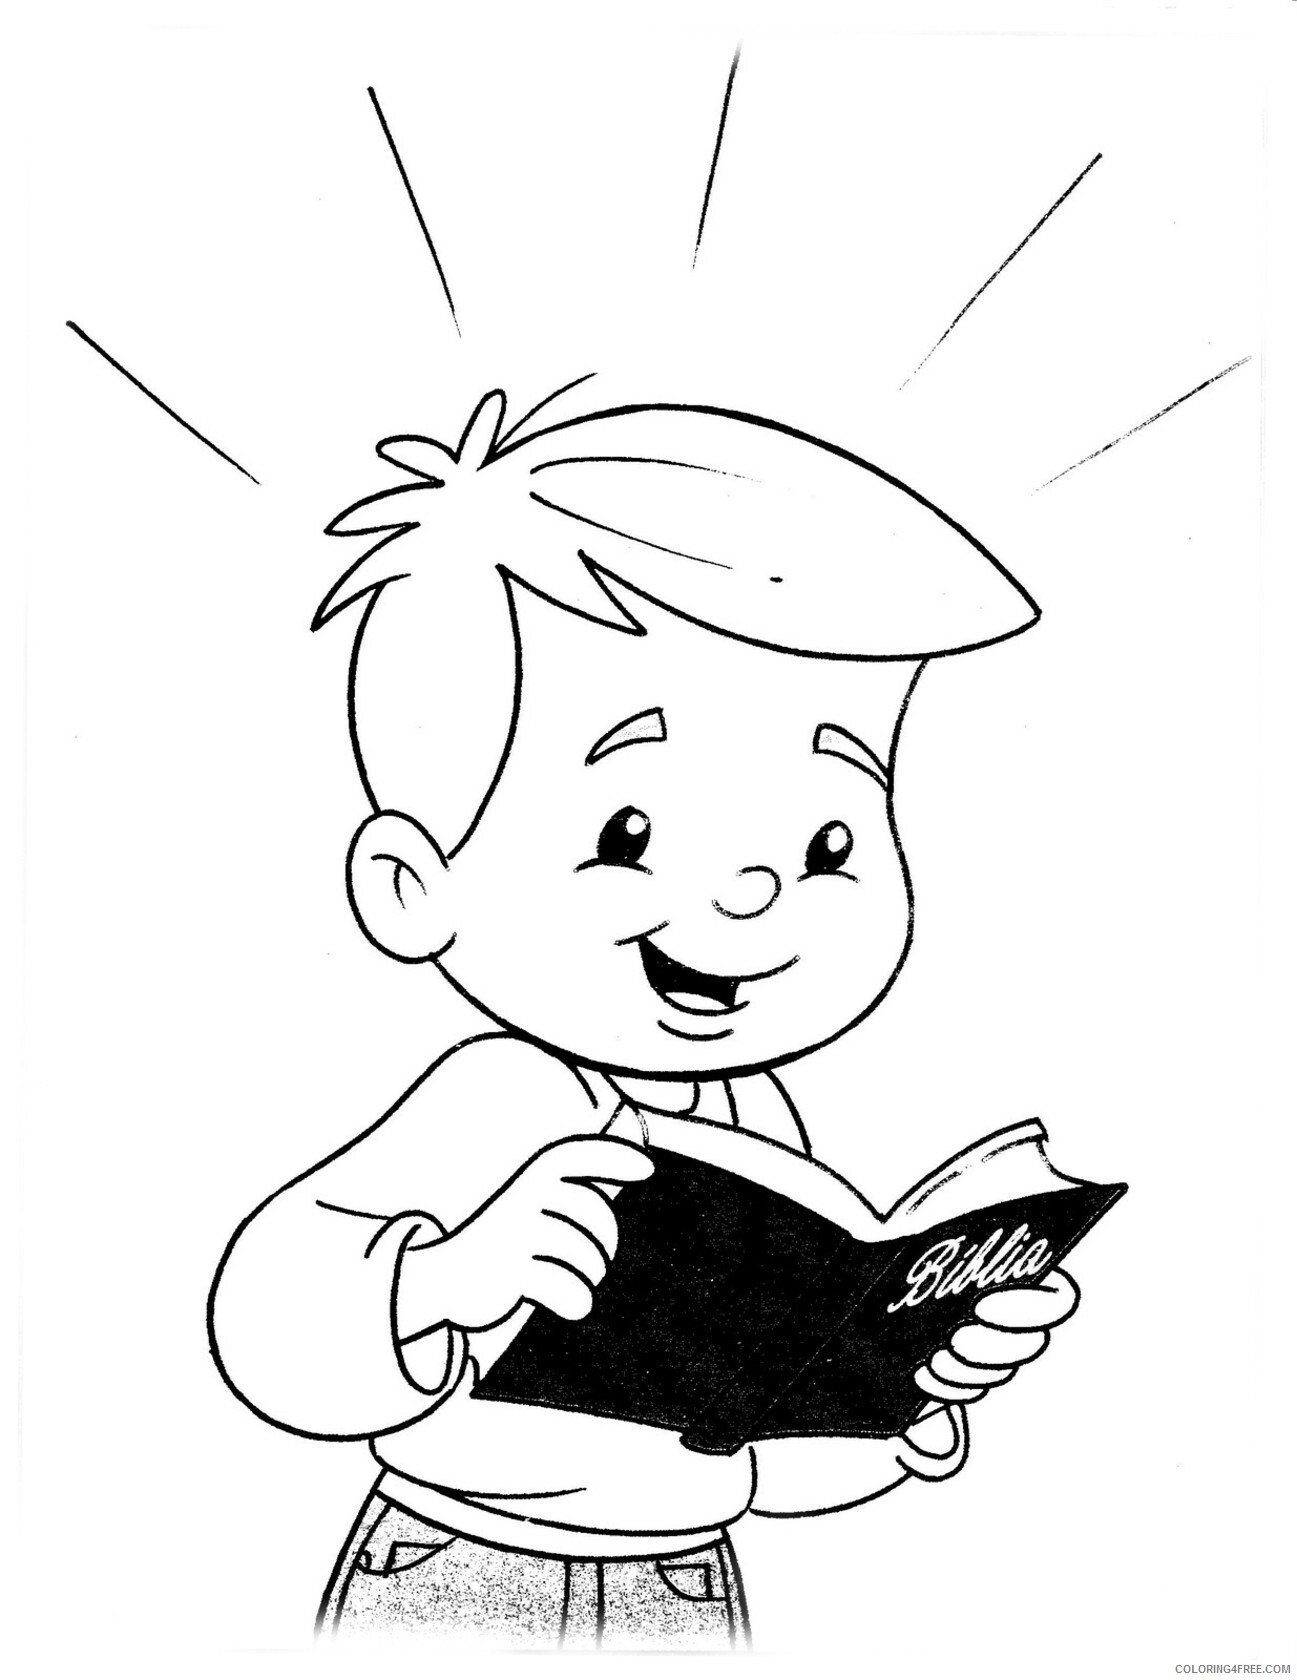 Christian Coloring Pages printable christian for kids Printable 2021 1505 Coloring4free